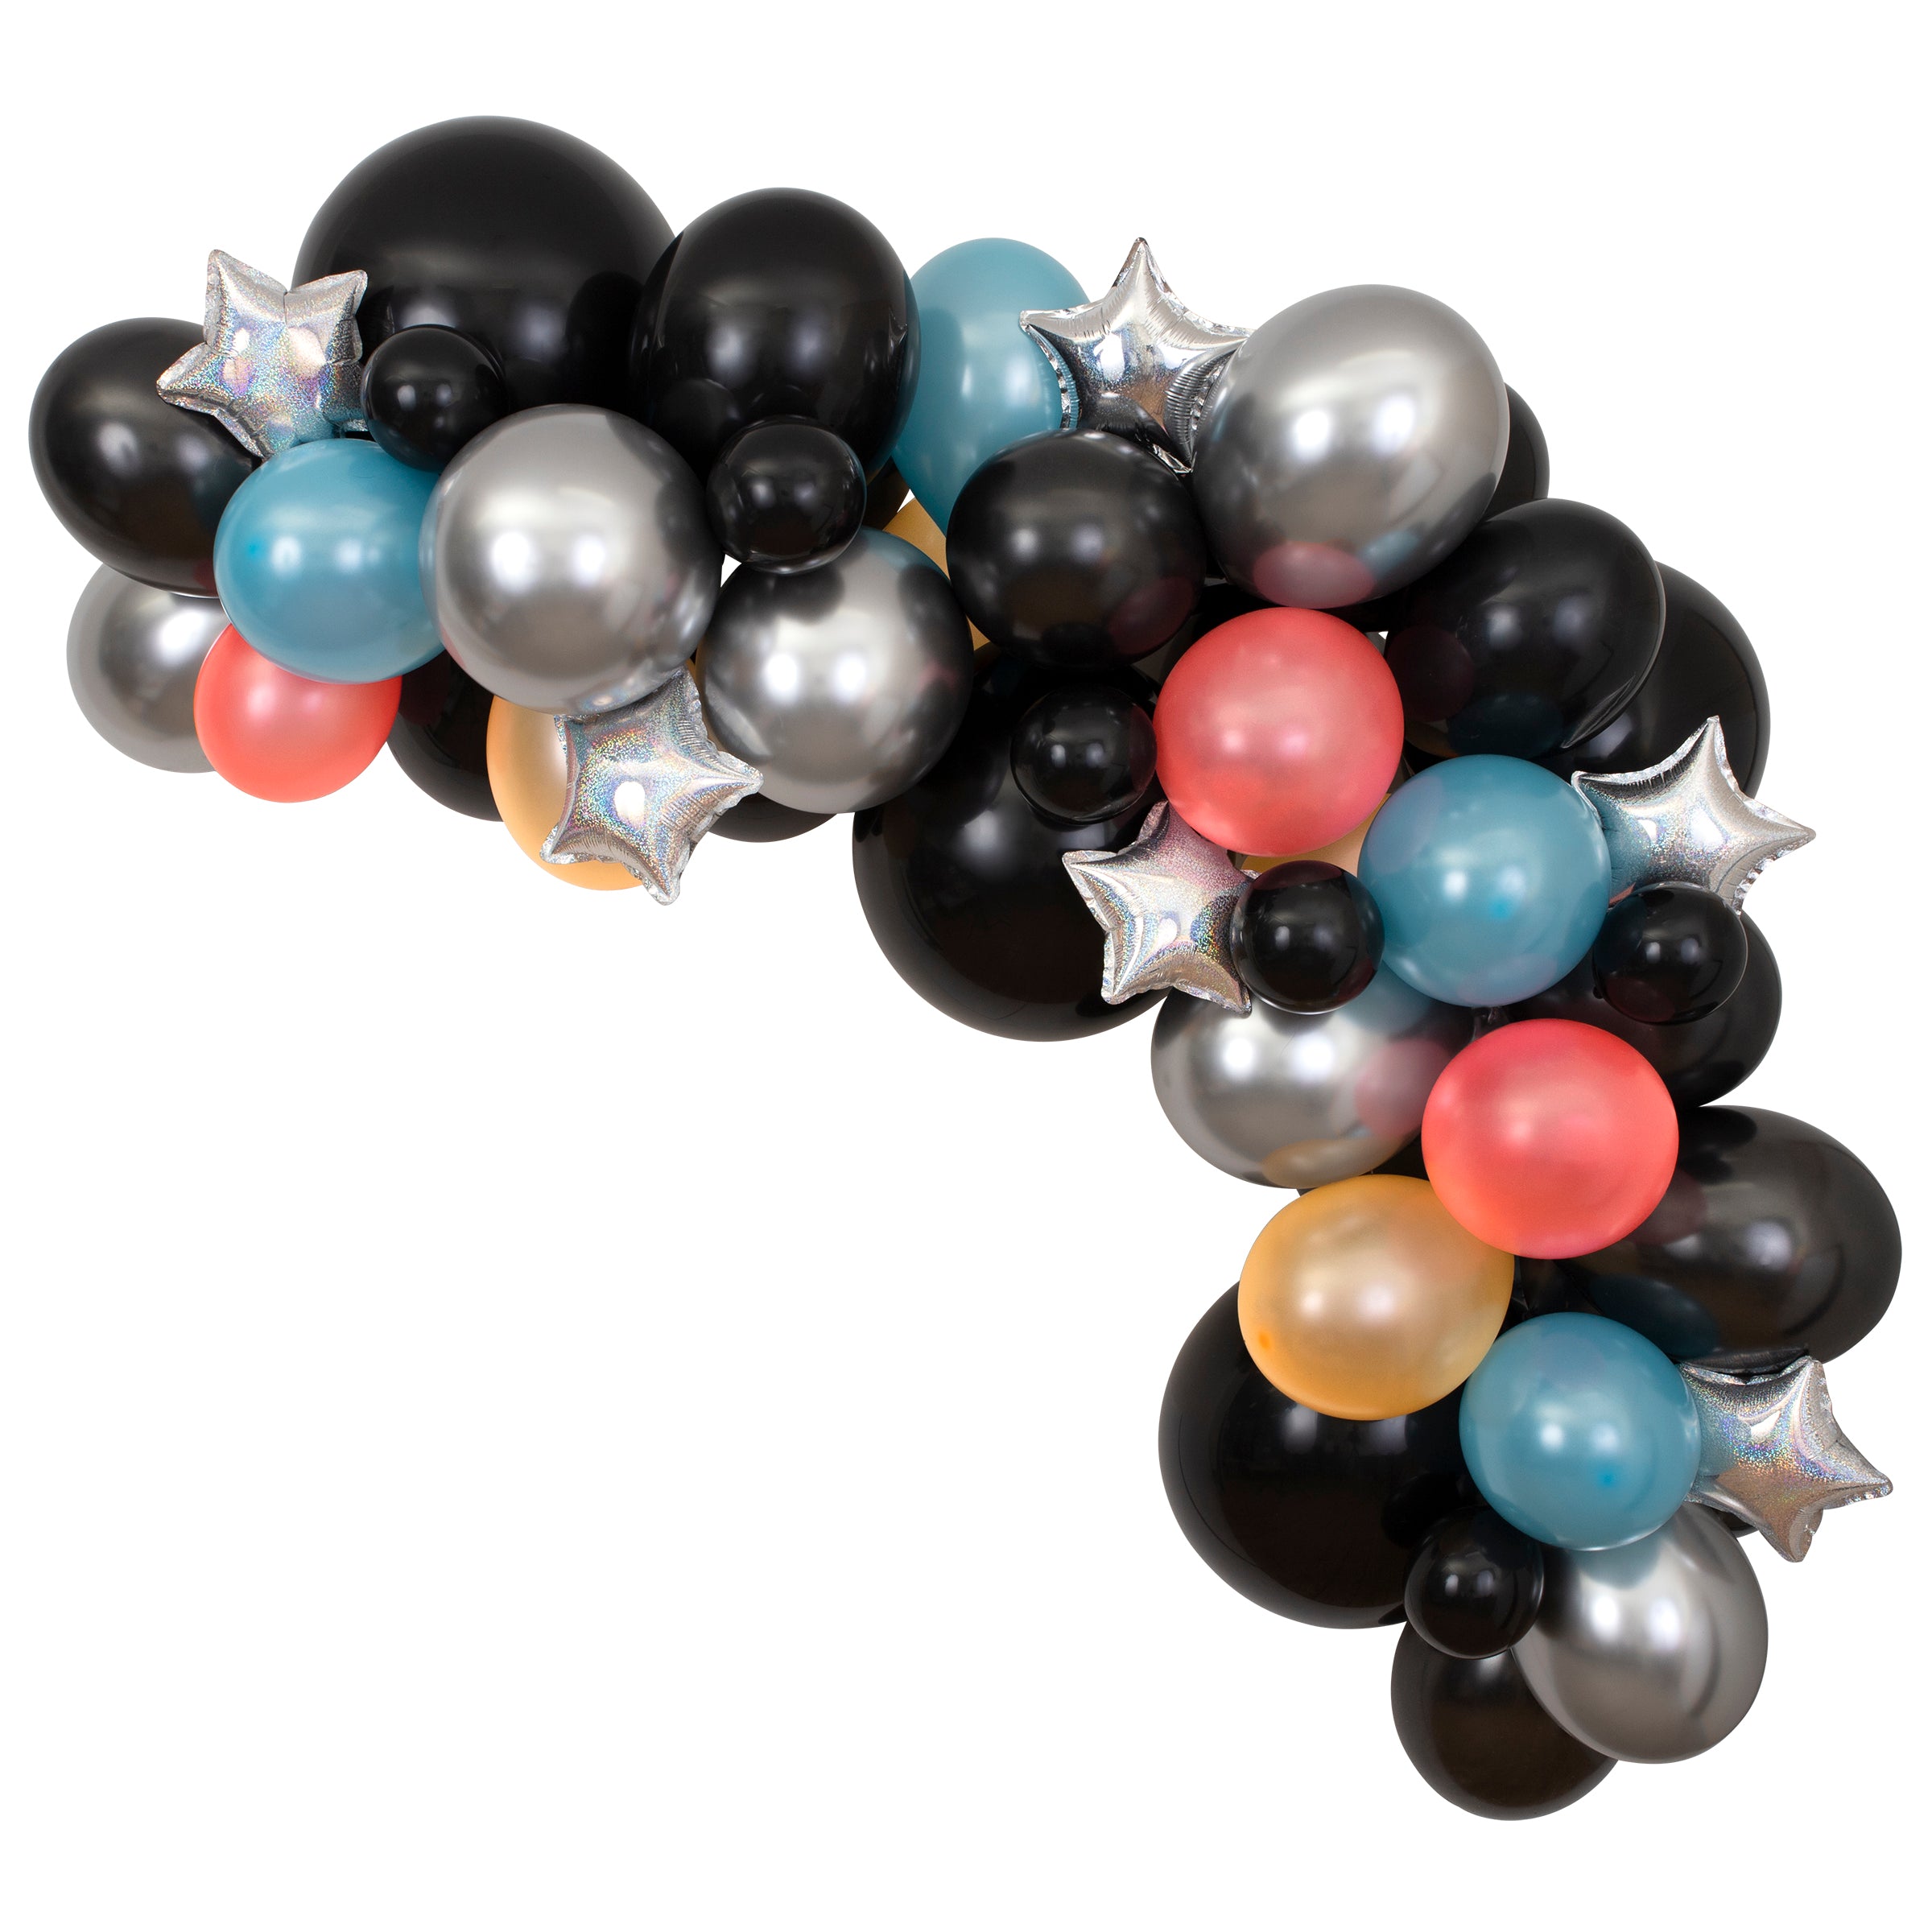 Our balloon kit is an easy way to create a colorful balloon garland, with black balloons, star balloons, foil balloons and metallic balloons.